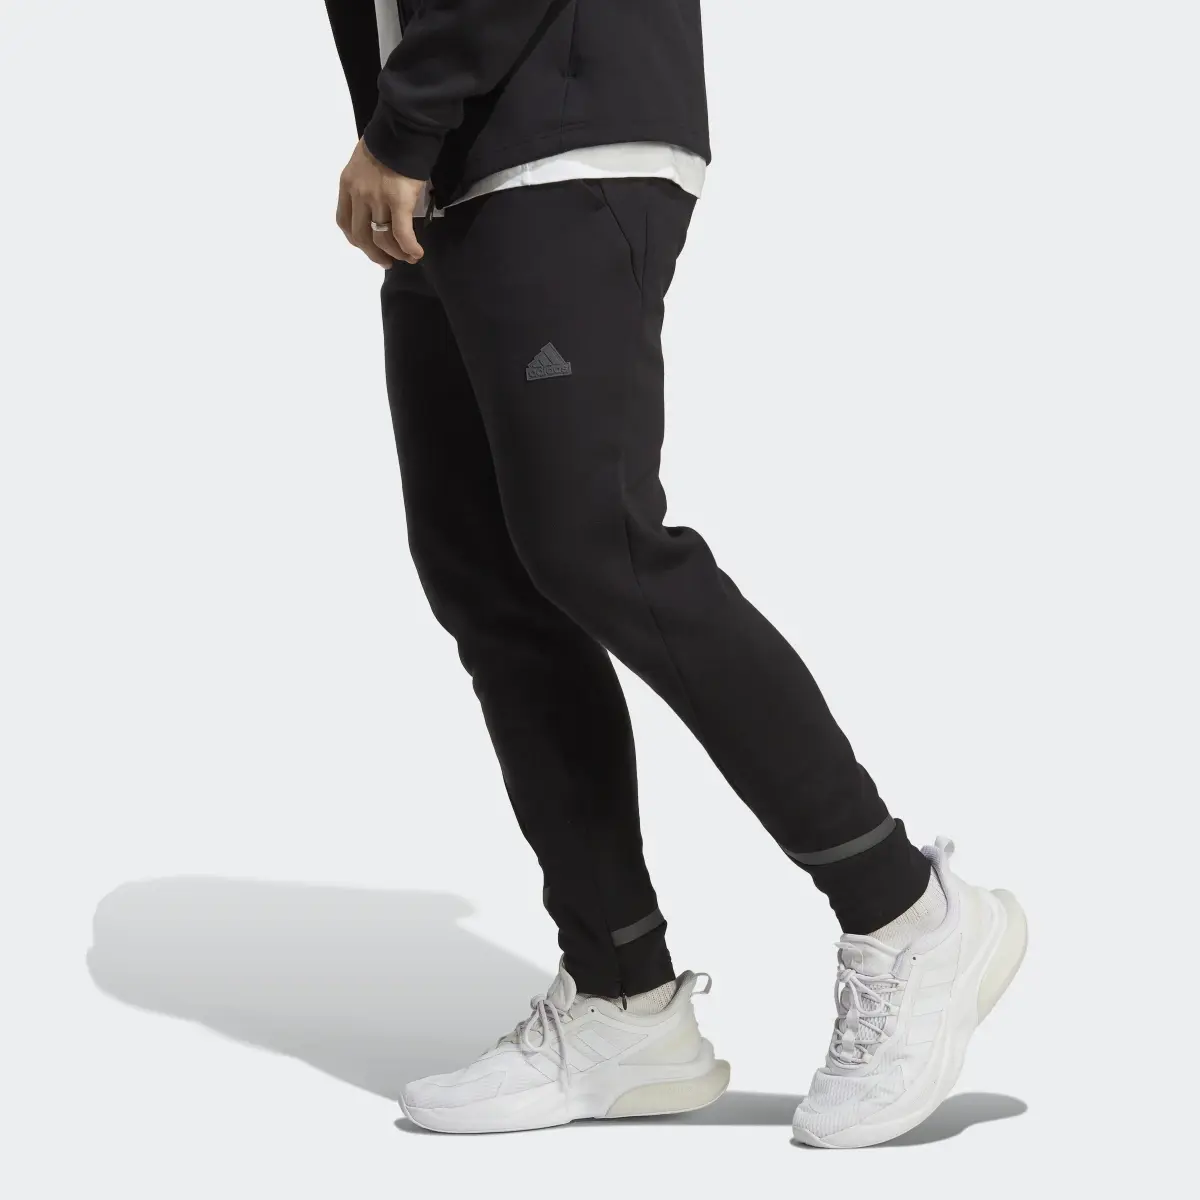 Adidas Pants Designed for Gameday. 2